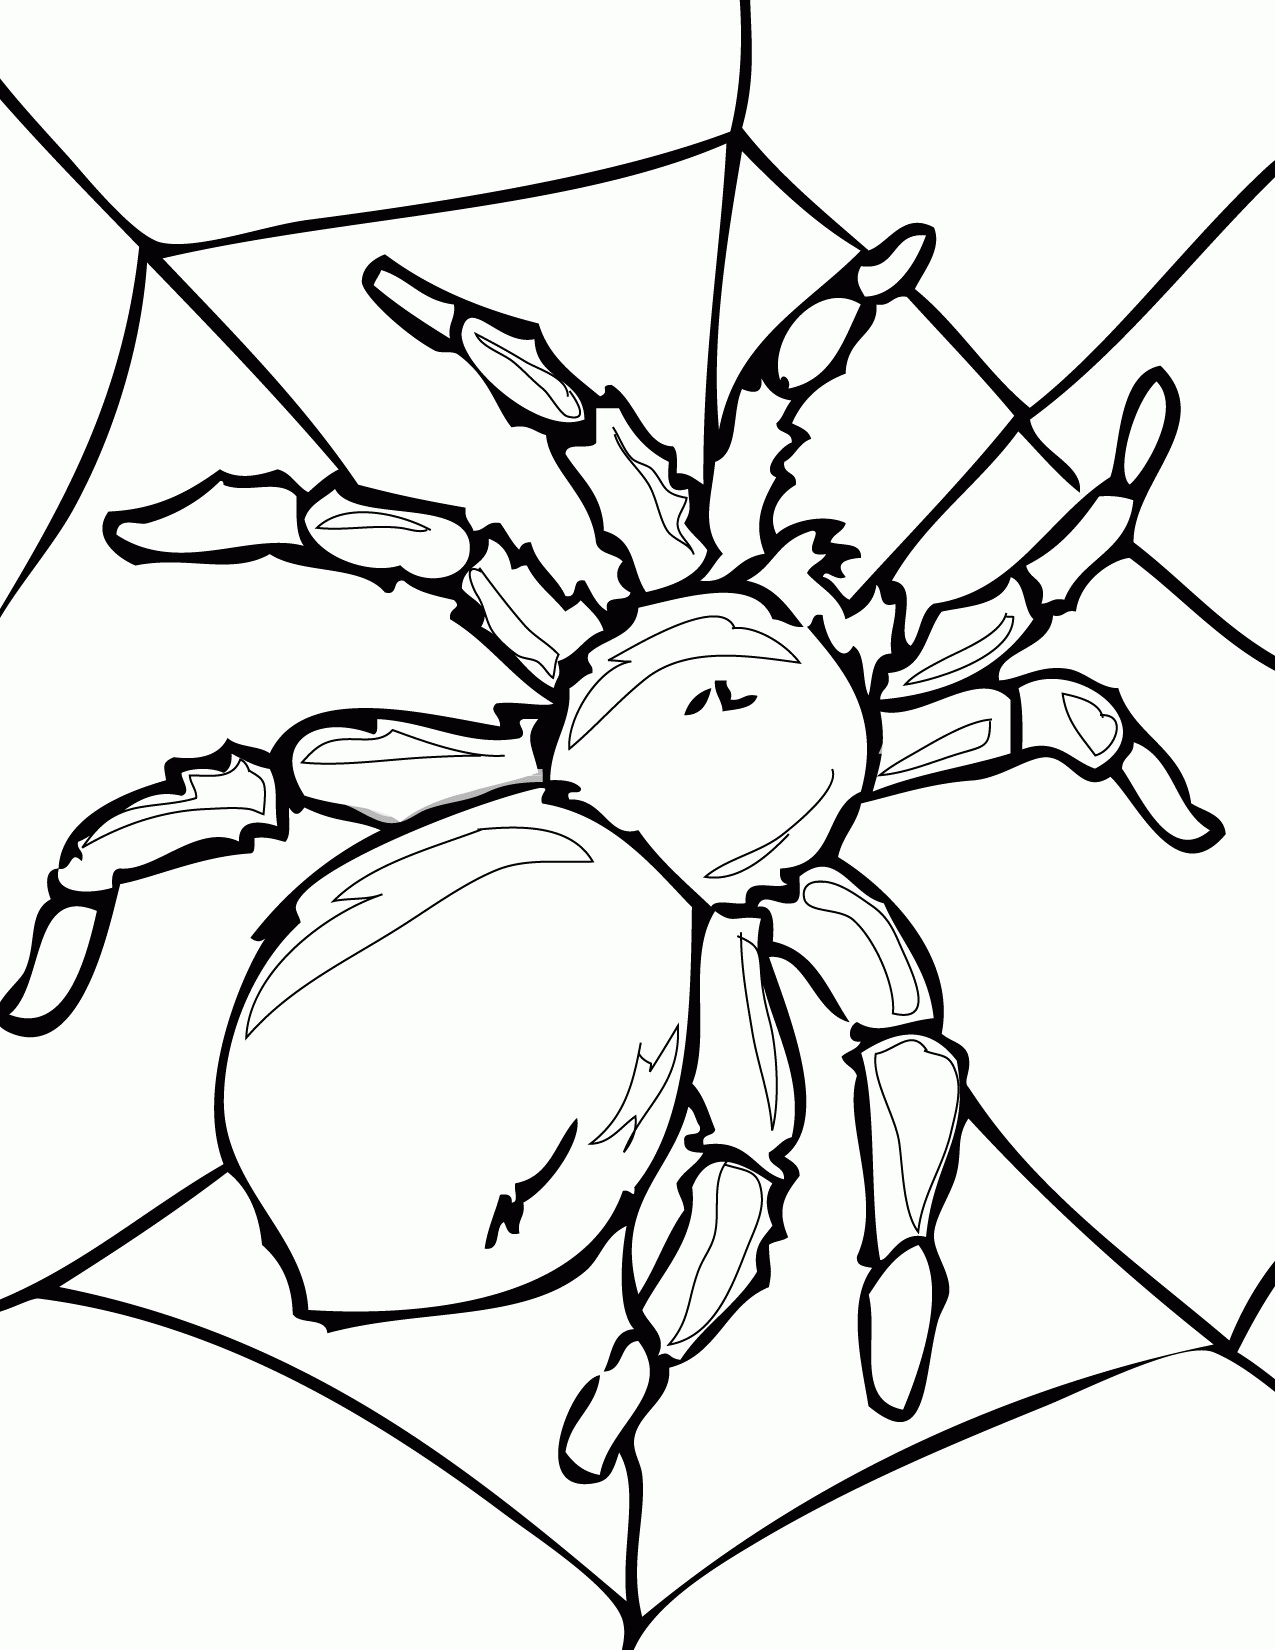 spider coloring pages for kids | Only Coloring Pages